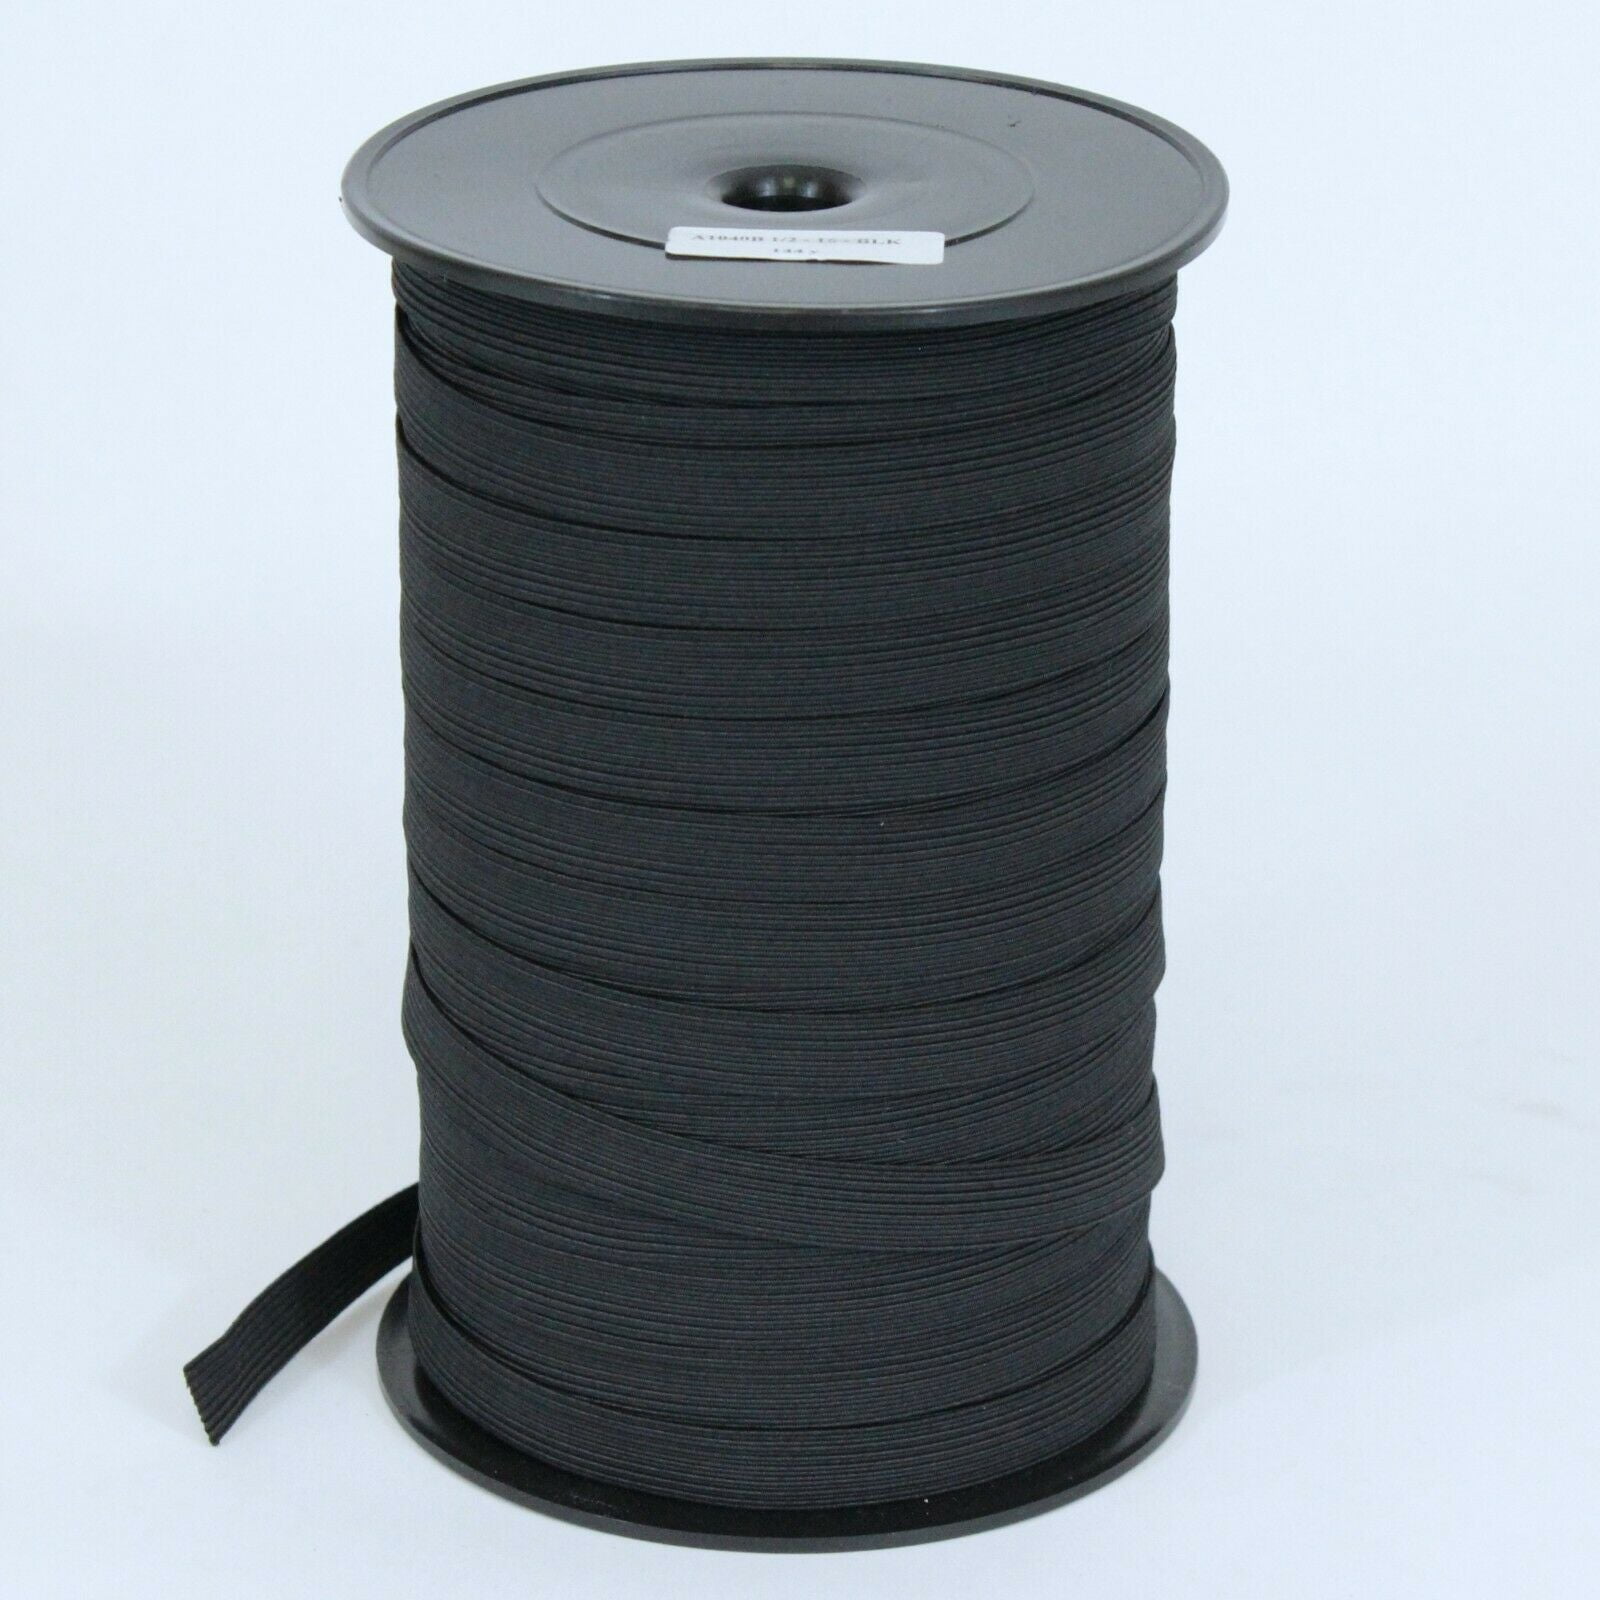 1 Roll of Rubber Bands Clothes Stretch Elastic Band Sewing Band Elastic Cord for DIY, Black